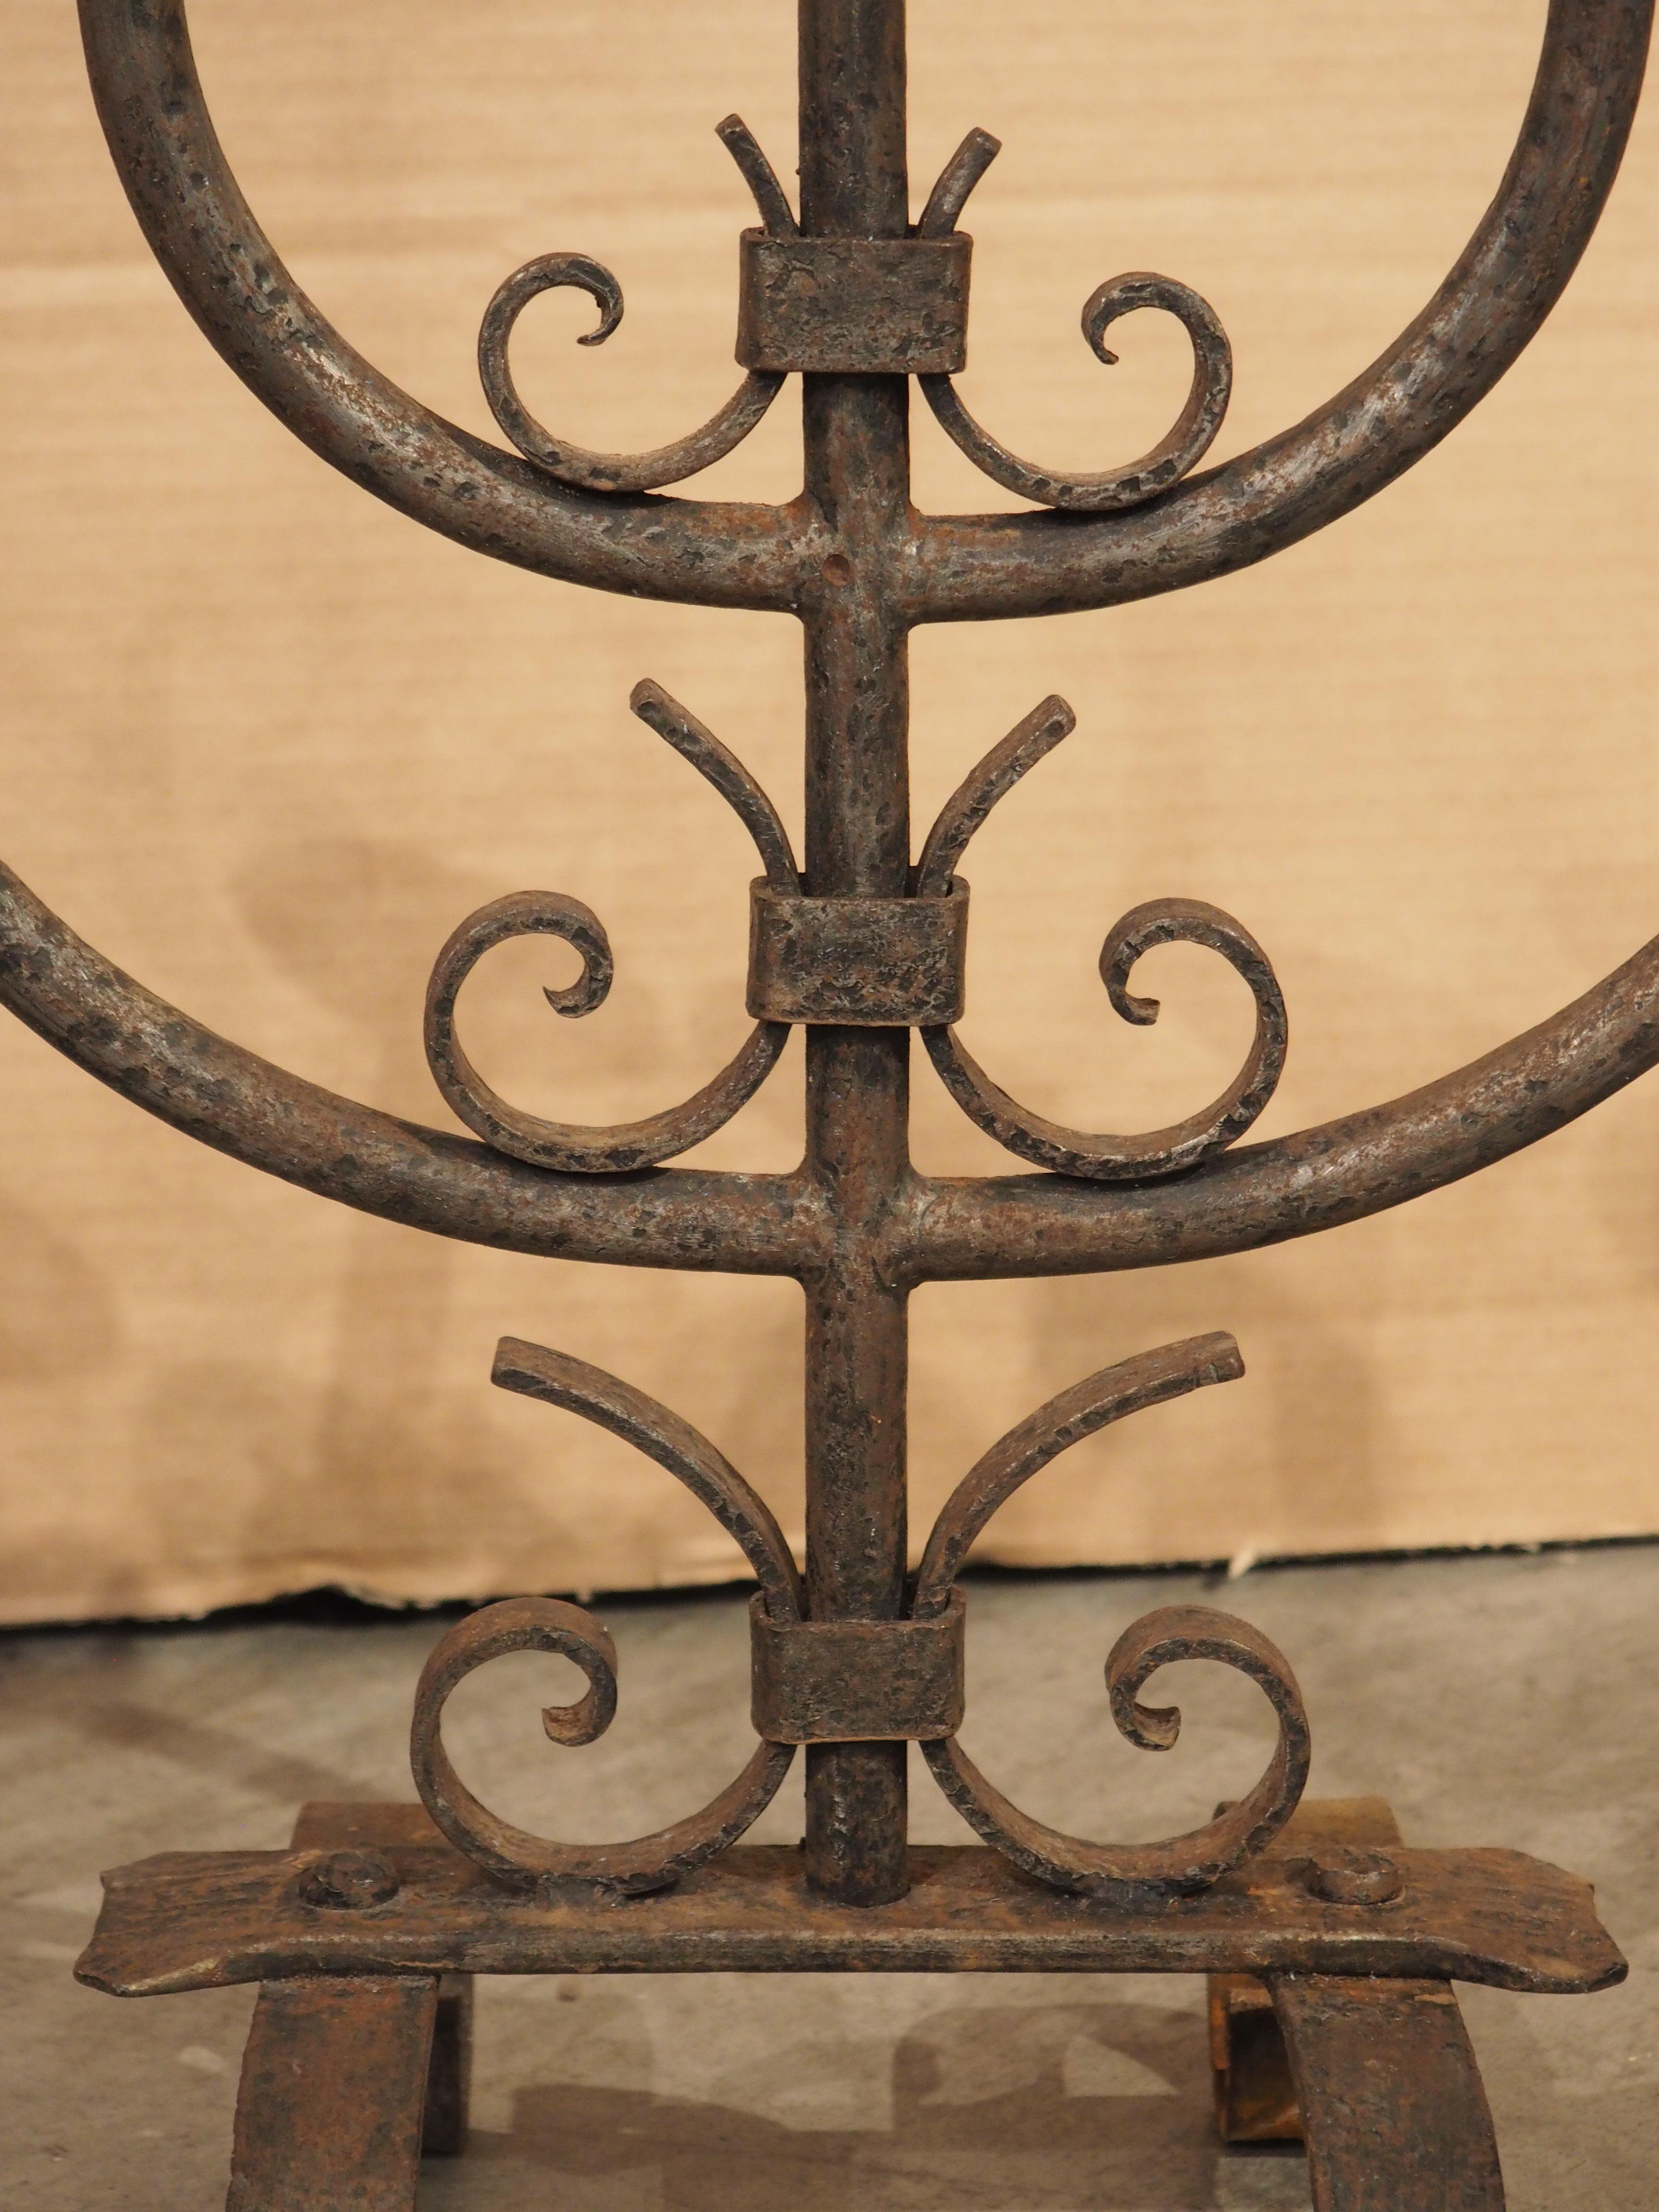 Metal Pair of Antique Wrought Iron Candelabras from Bordeaux, France C. 1900